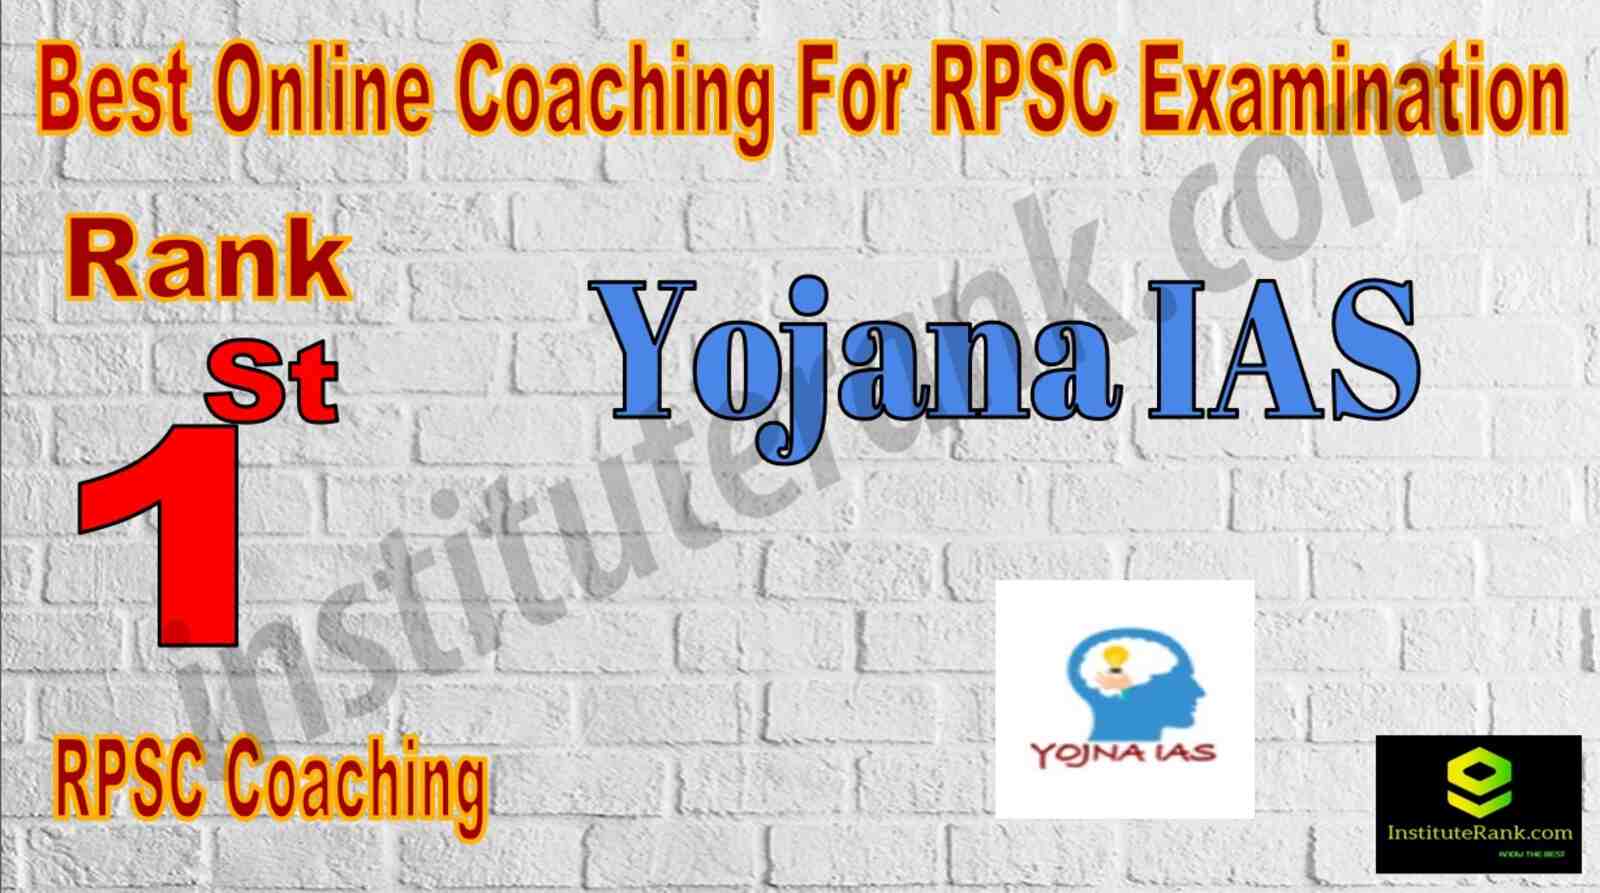 Rank 1. Best Online Coaching Centre for the RPSC Examination